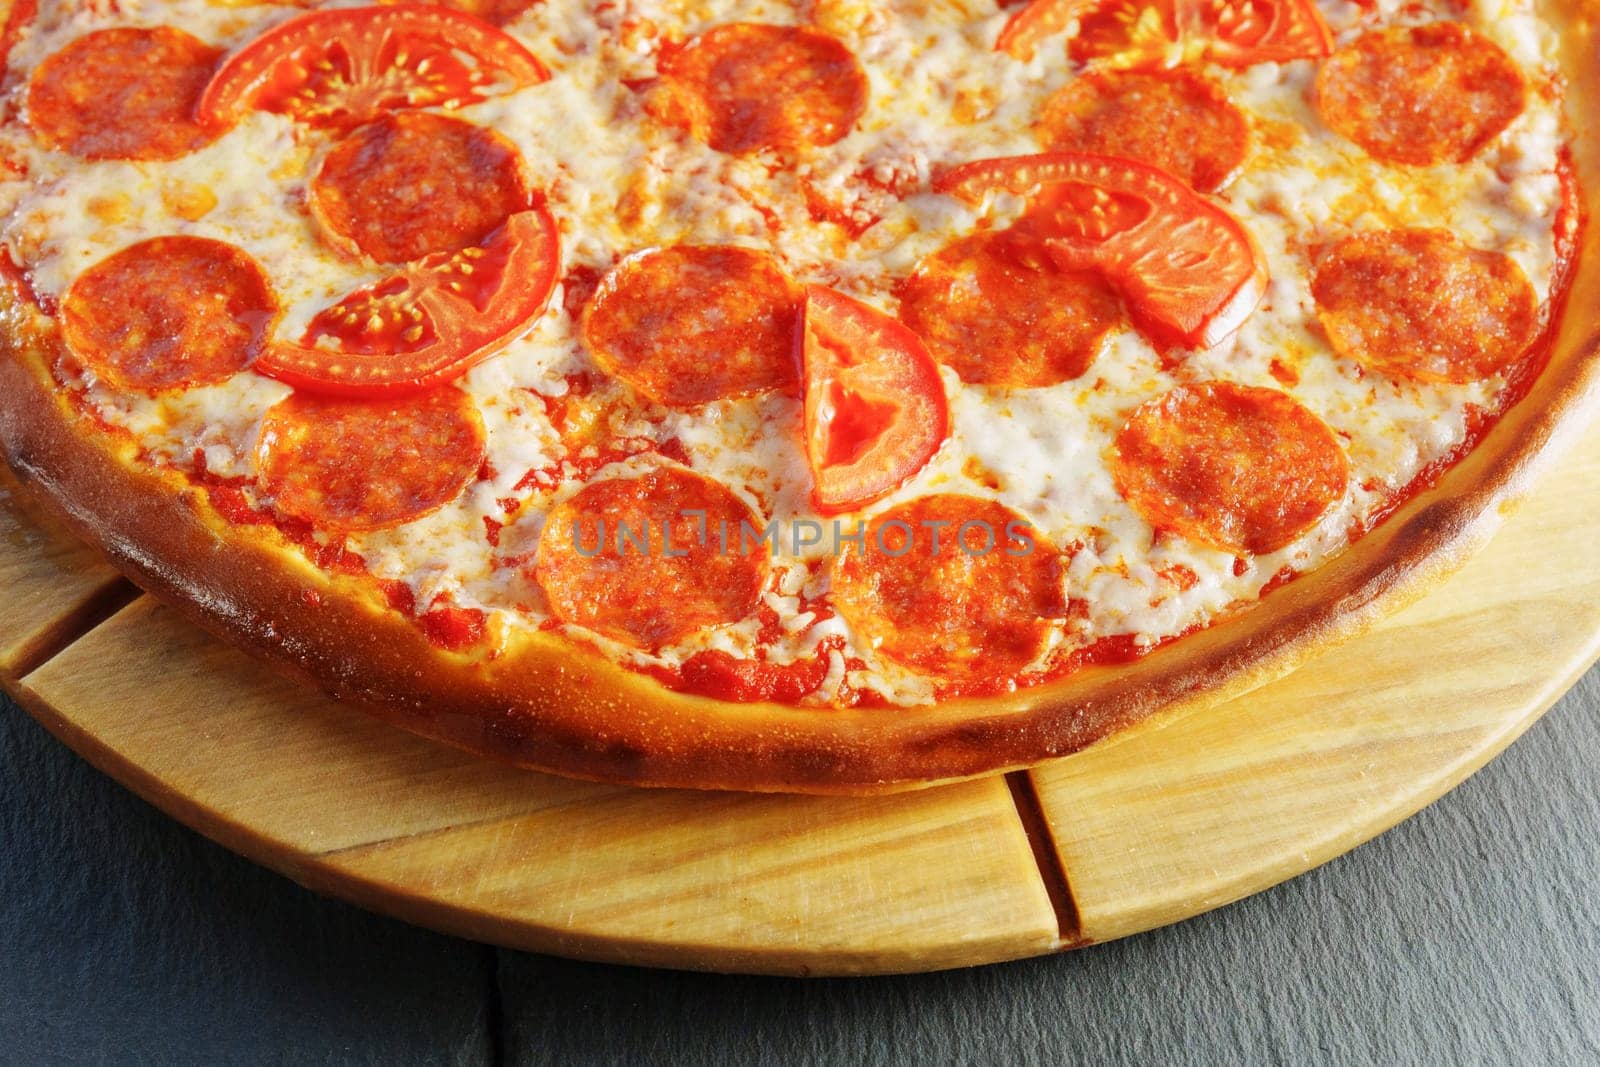 Baked pepperoni and tomato pizza sits invitingly on a wooden serving board.